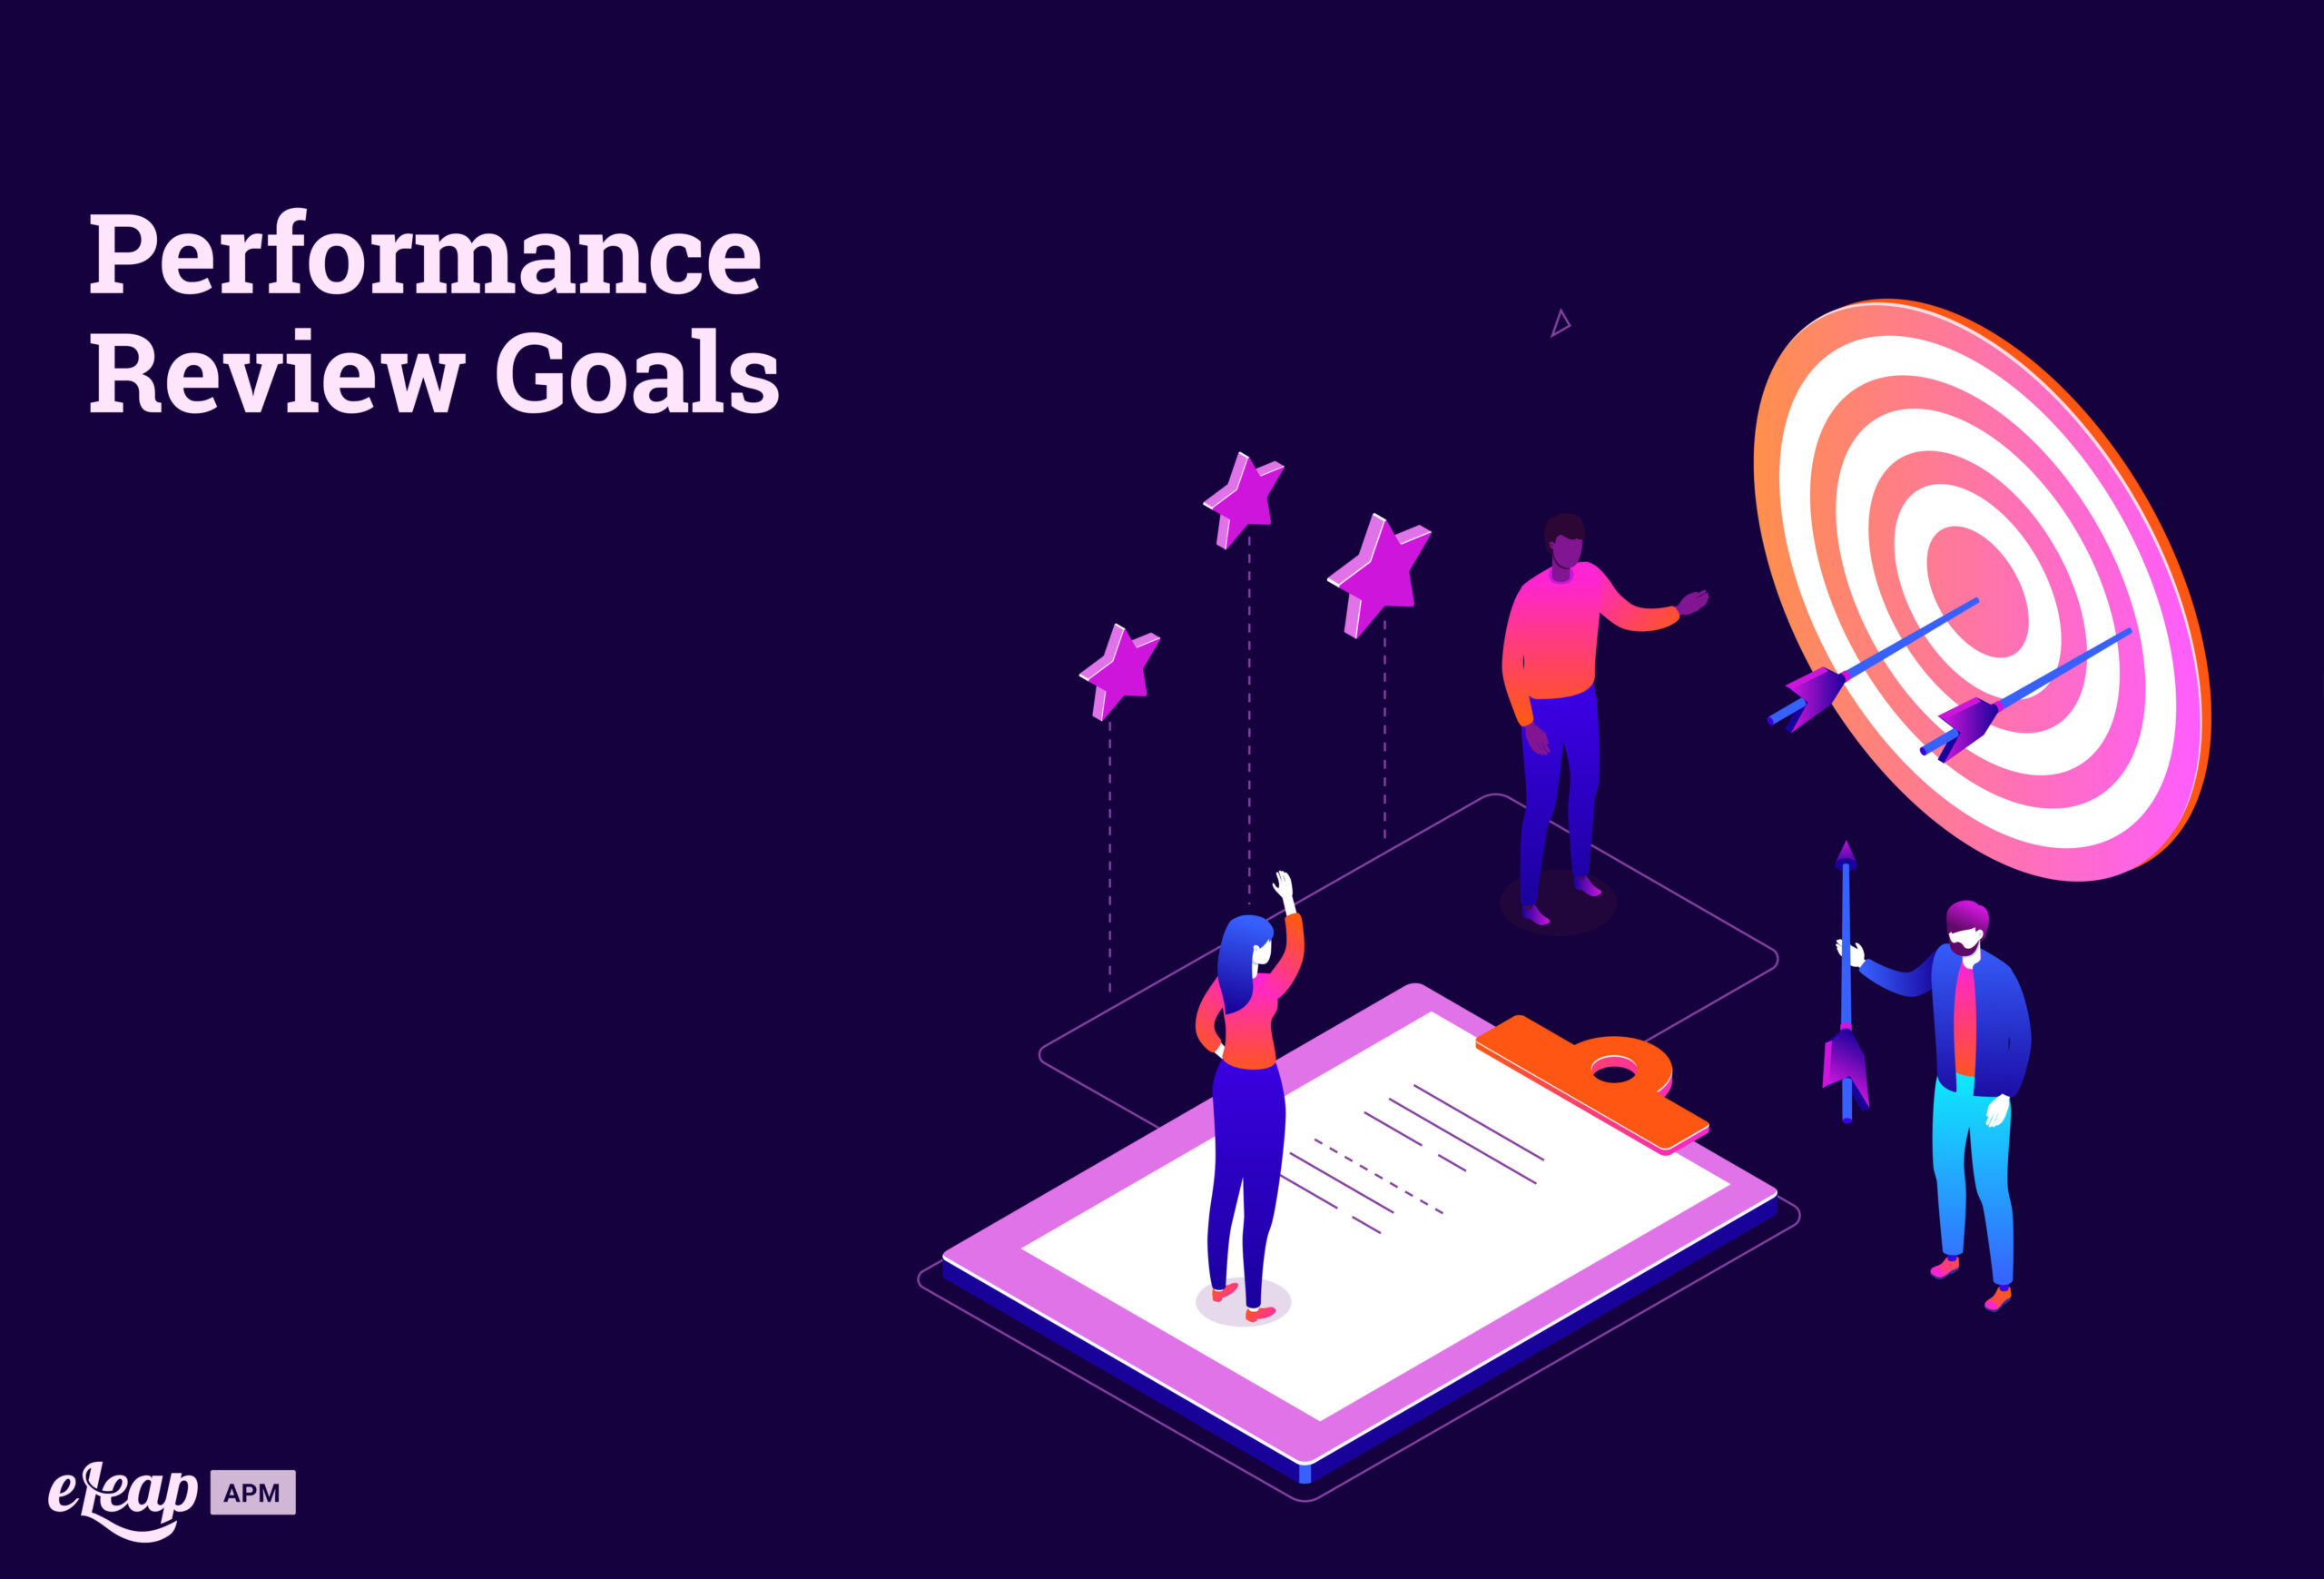 Performance Review Goals